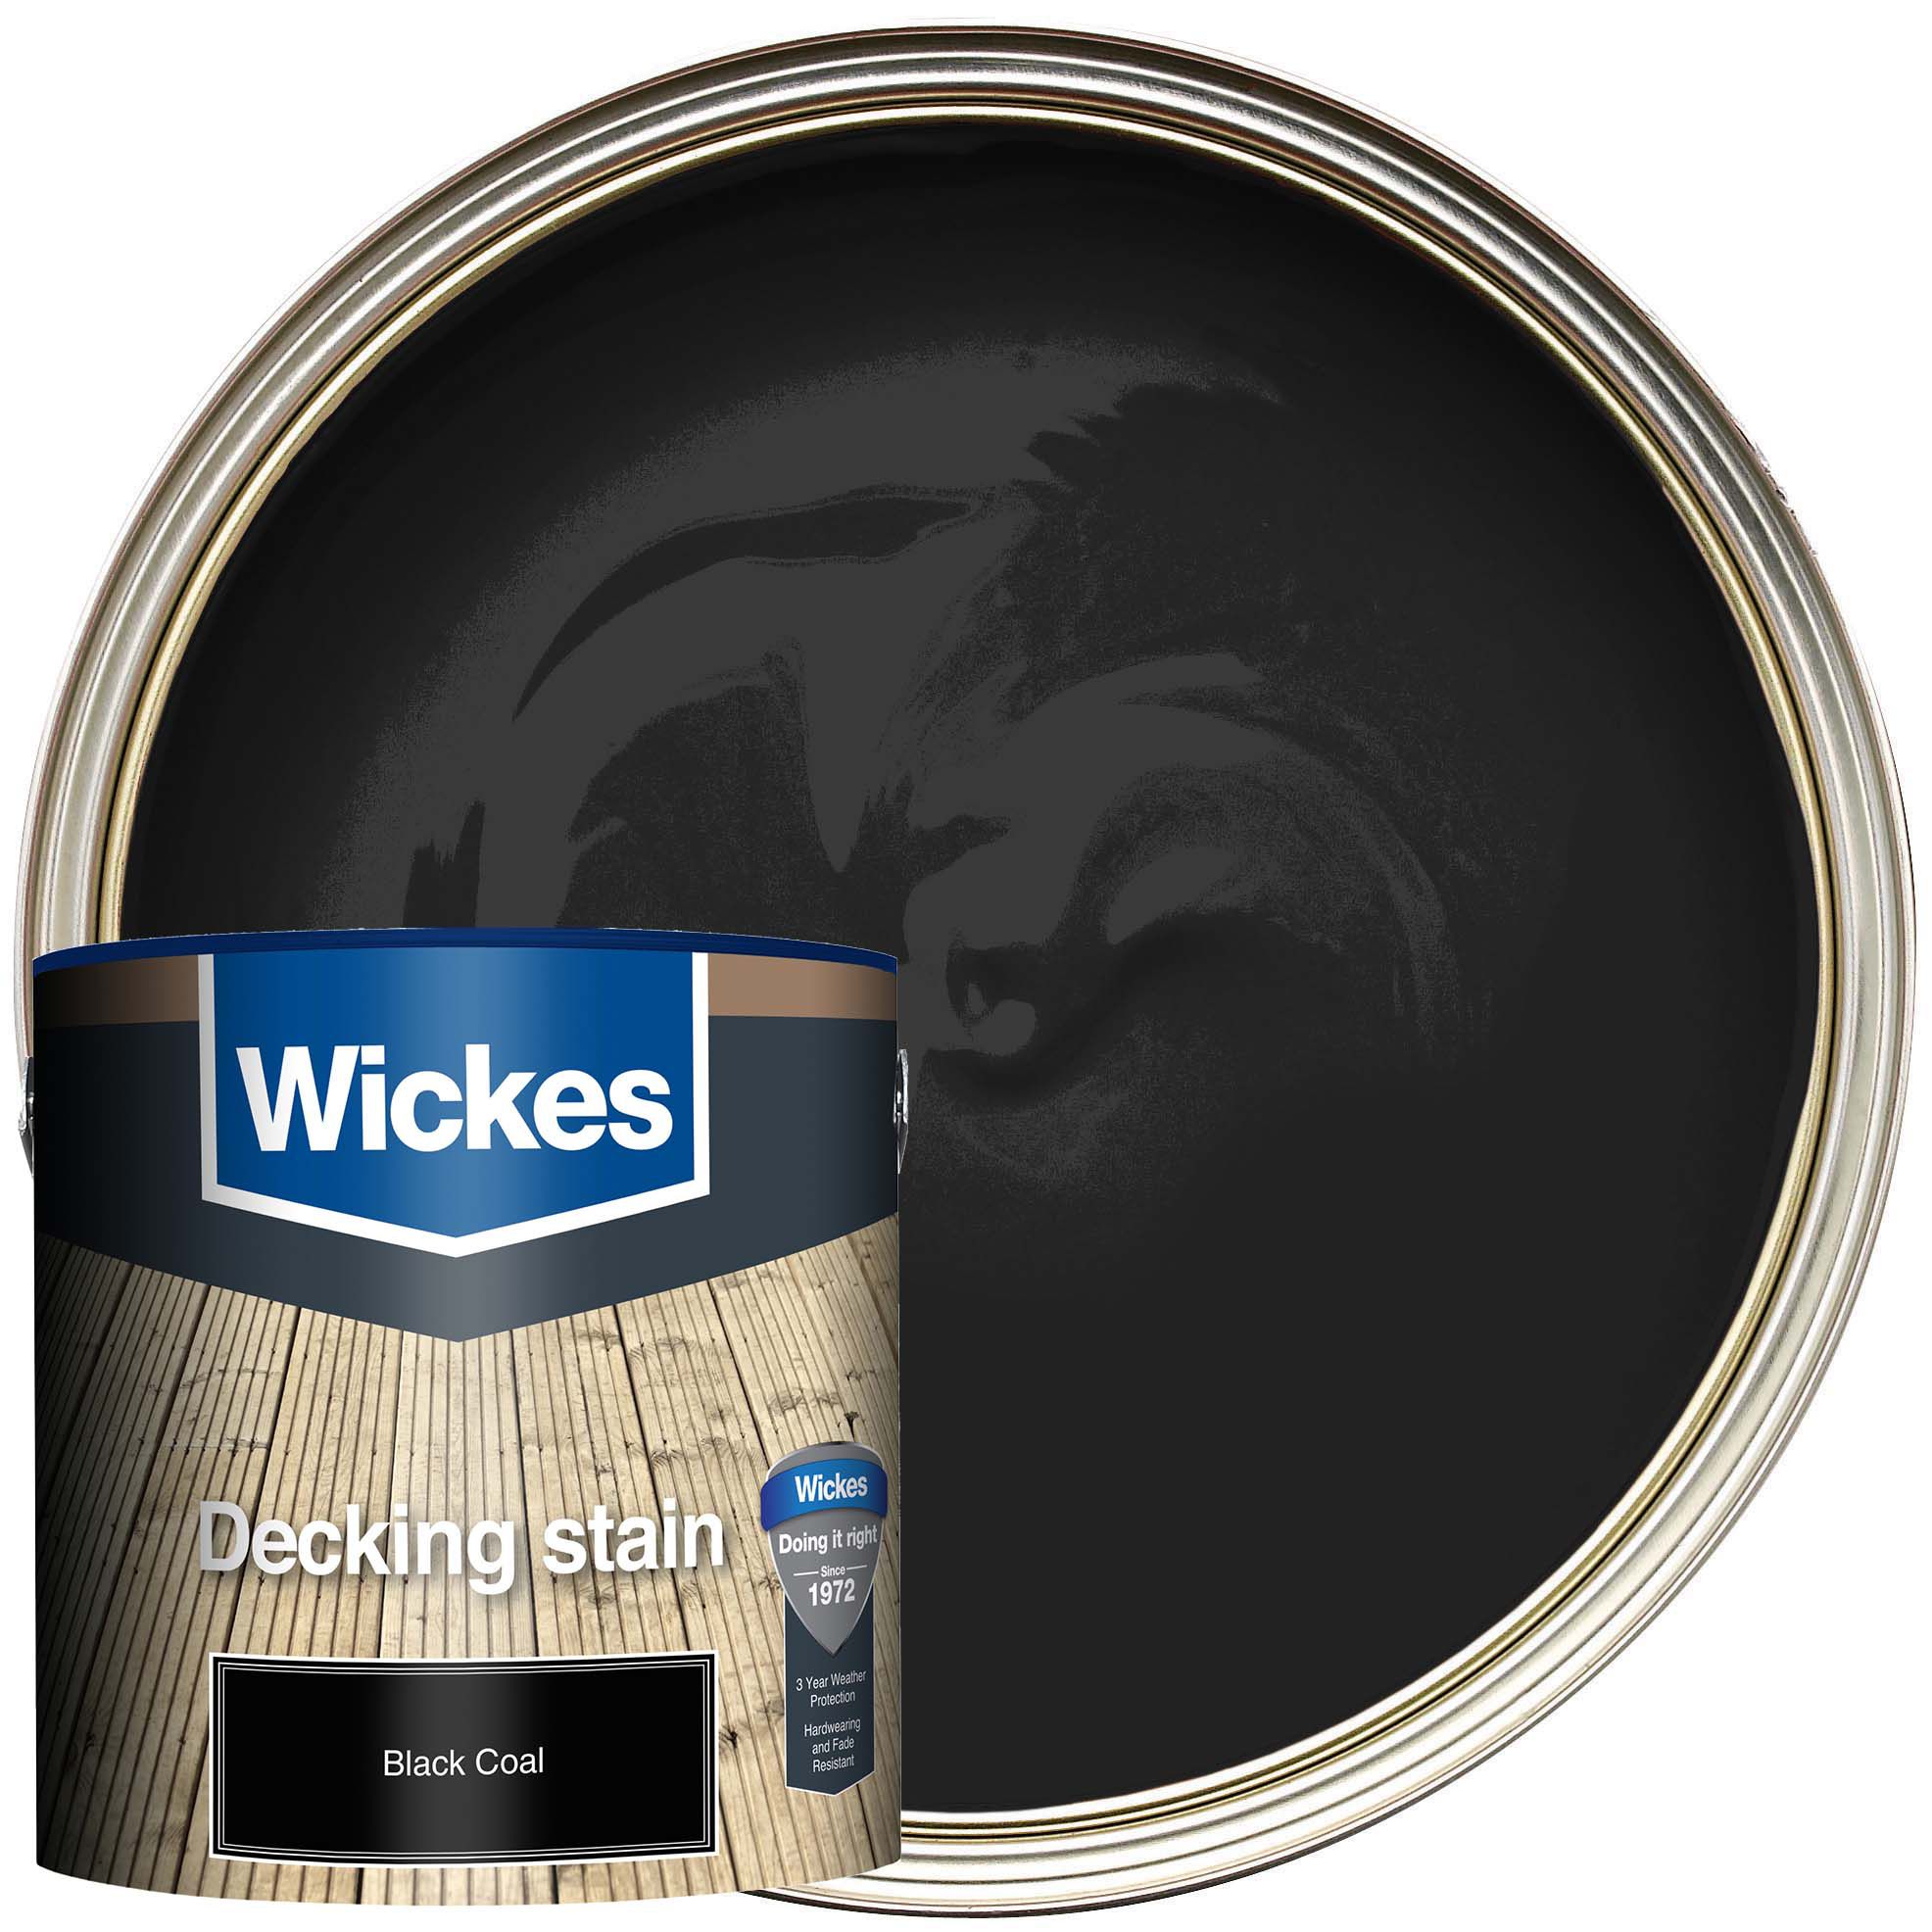 Image of Wickes Decking Stain Black Coal 2.5L